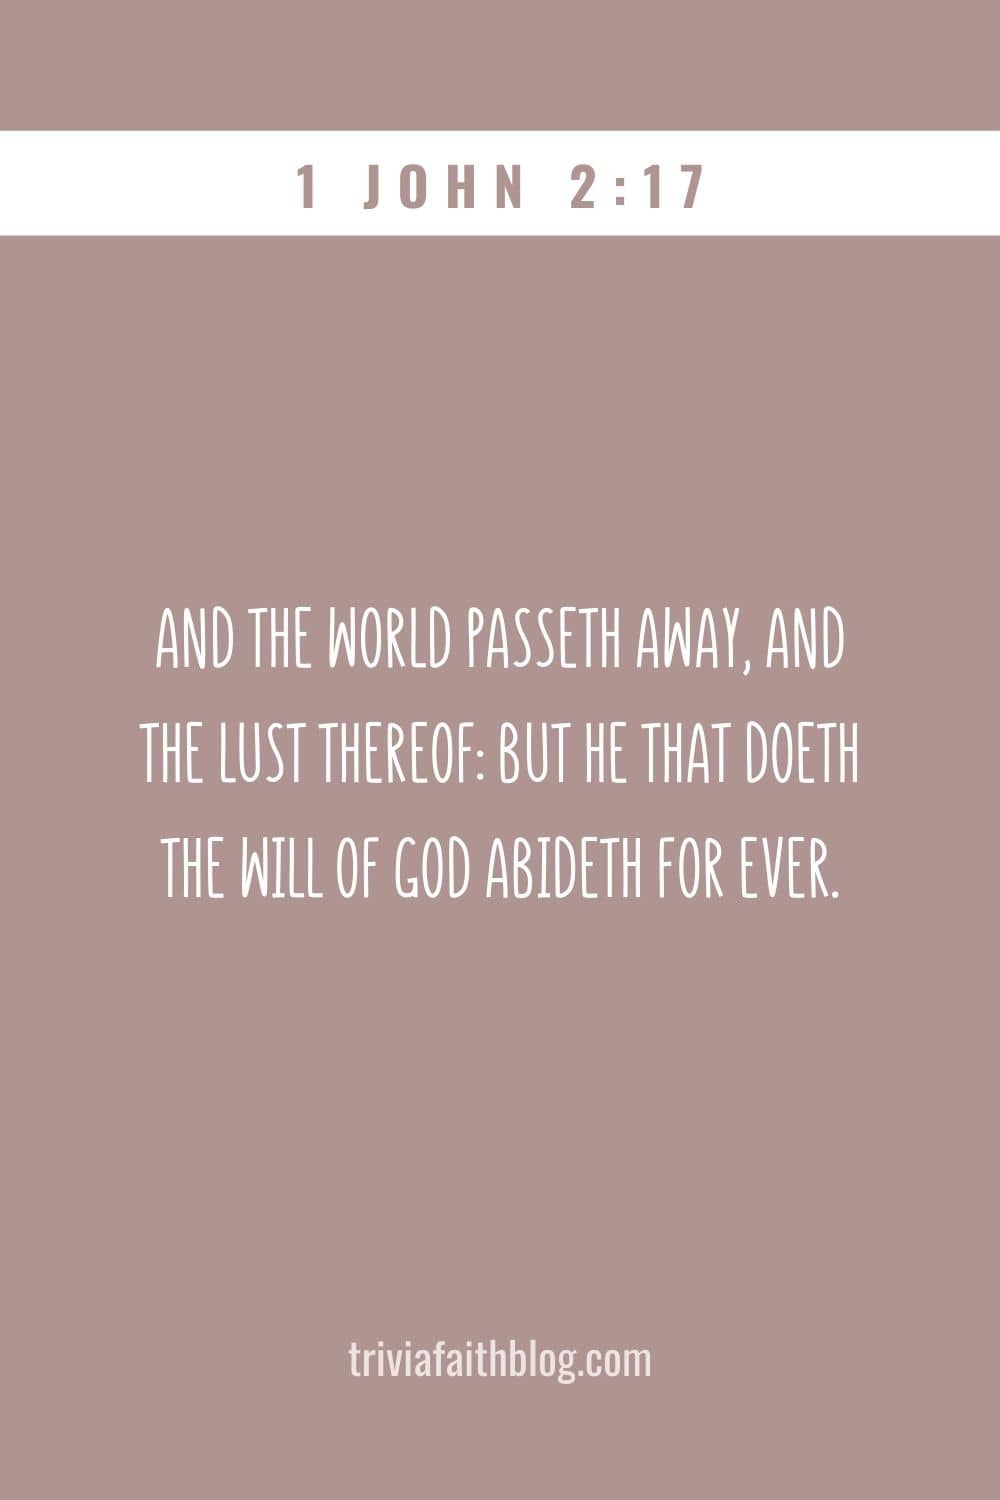 And the world passeth away, and the lust thereof: but he that doeth the will of God abideth for ever.